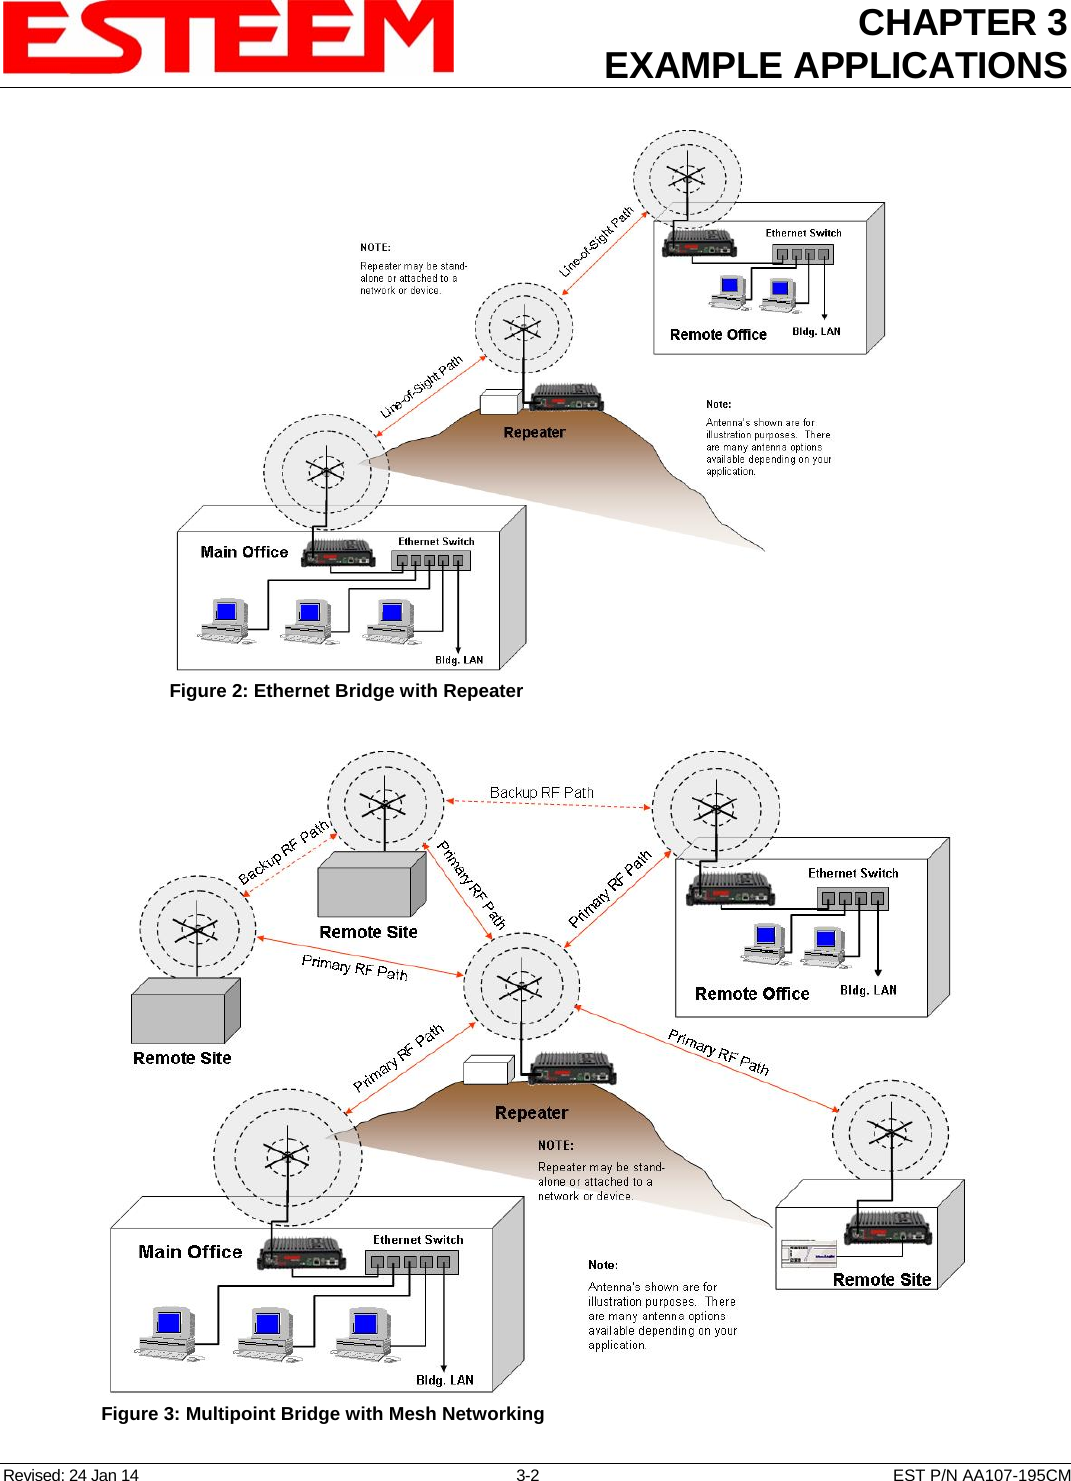 CHAPTER 3 EXAMPLE APPLICATIONS   Figure 2: Ethernet Bridge with Repeater   Figure 3: Multipoint Bridge with Mesh Networking  Revised: 24 Jan 14  3-2  EST P/N AA107-195CM 